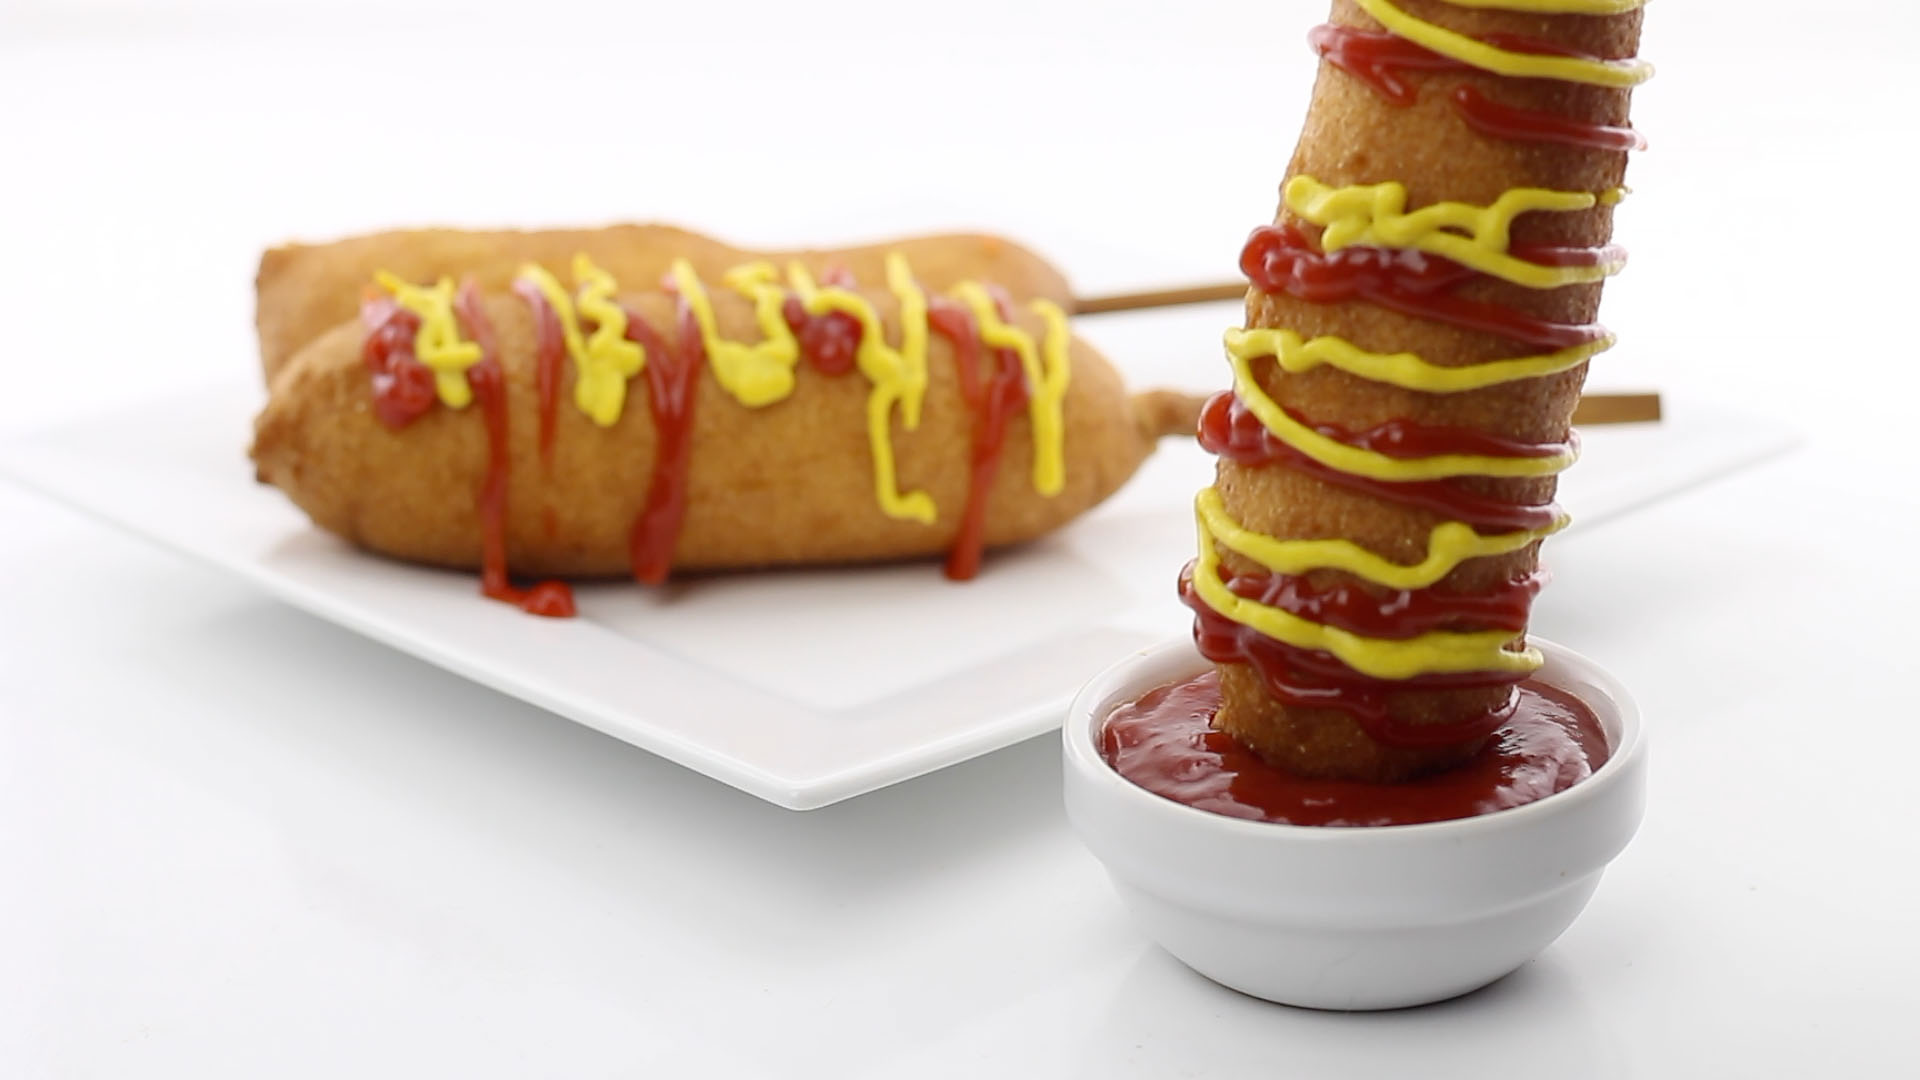 Corn dog being dipped in ketchup